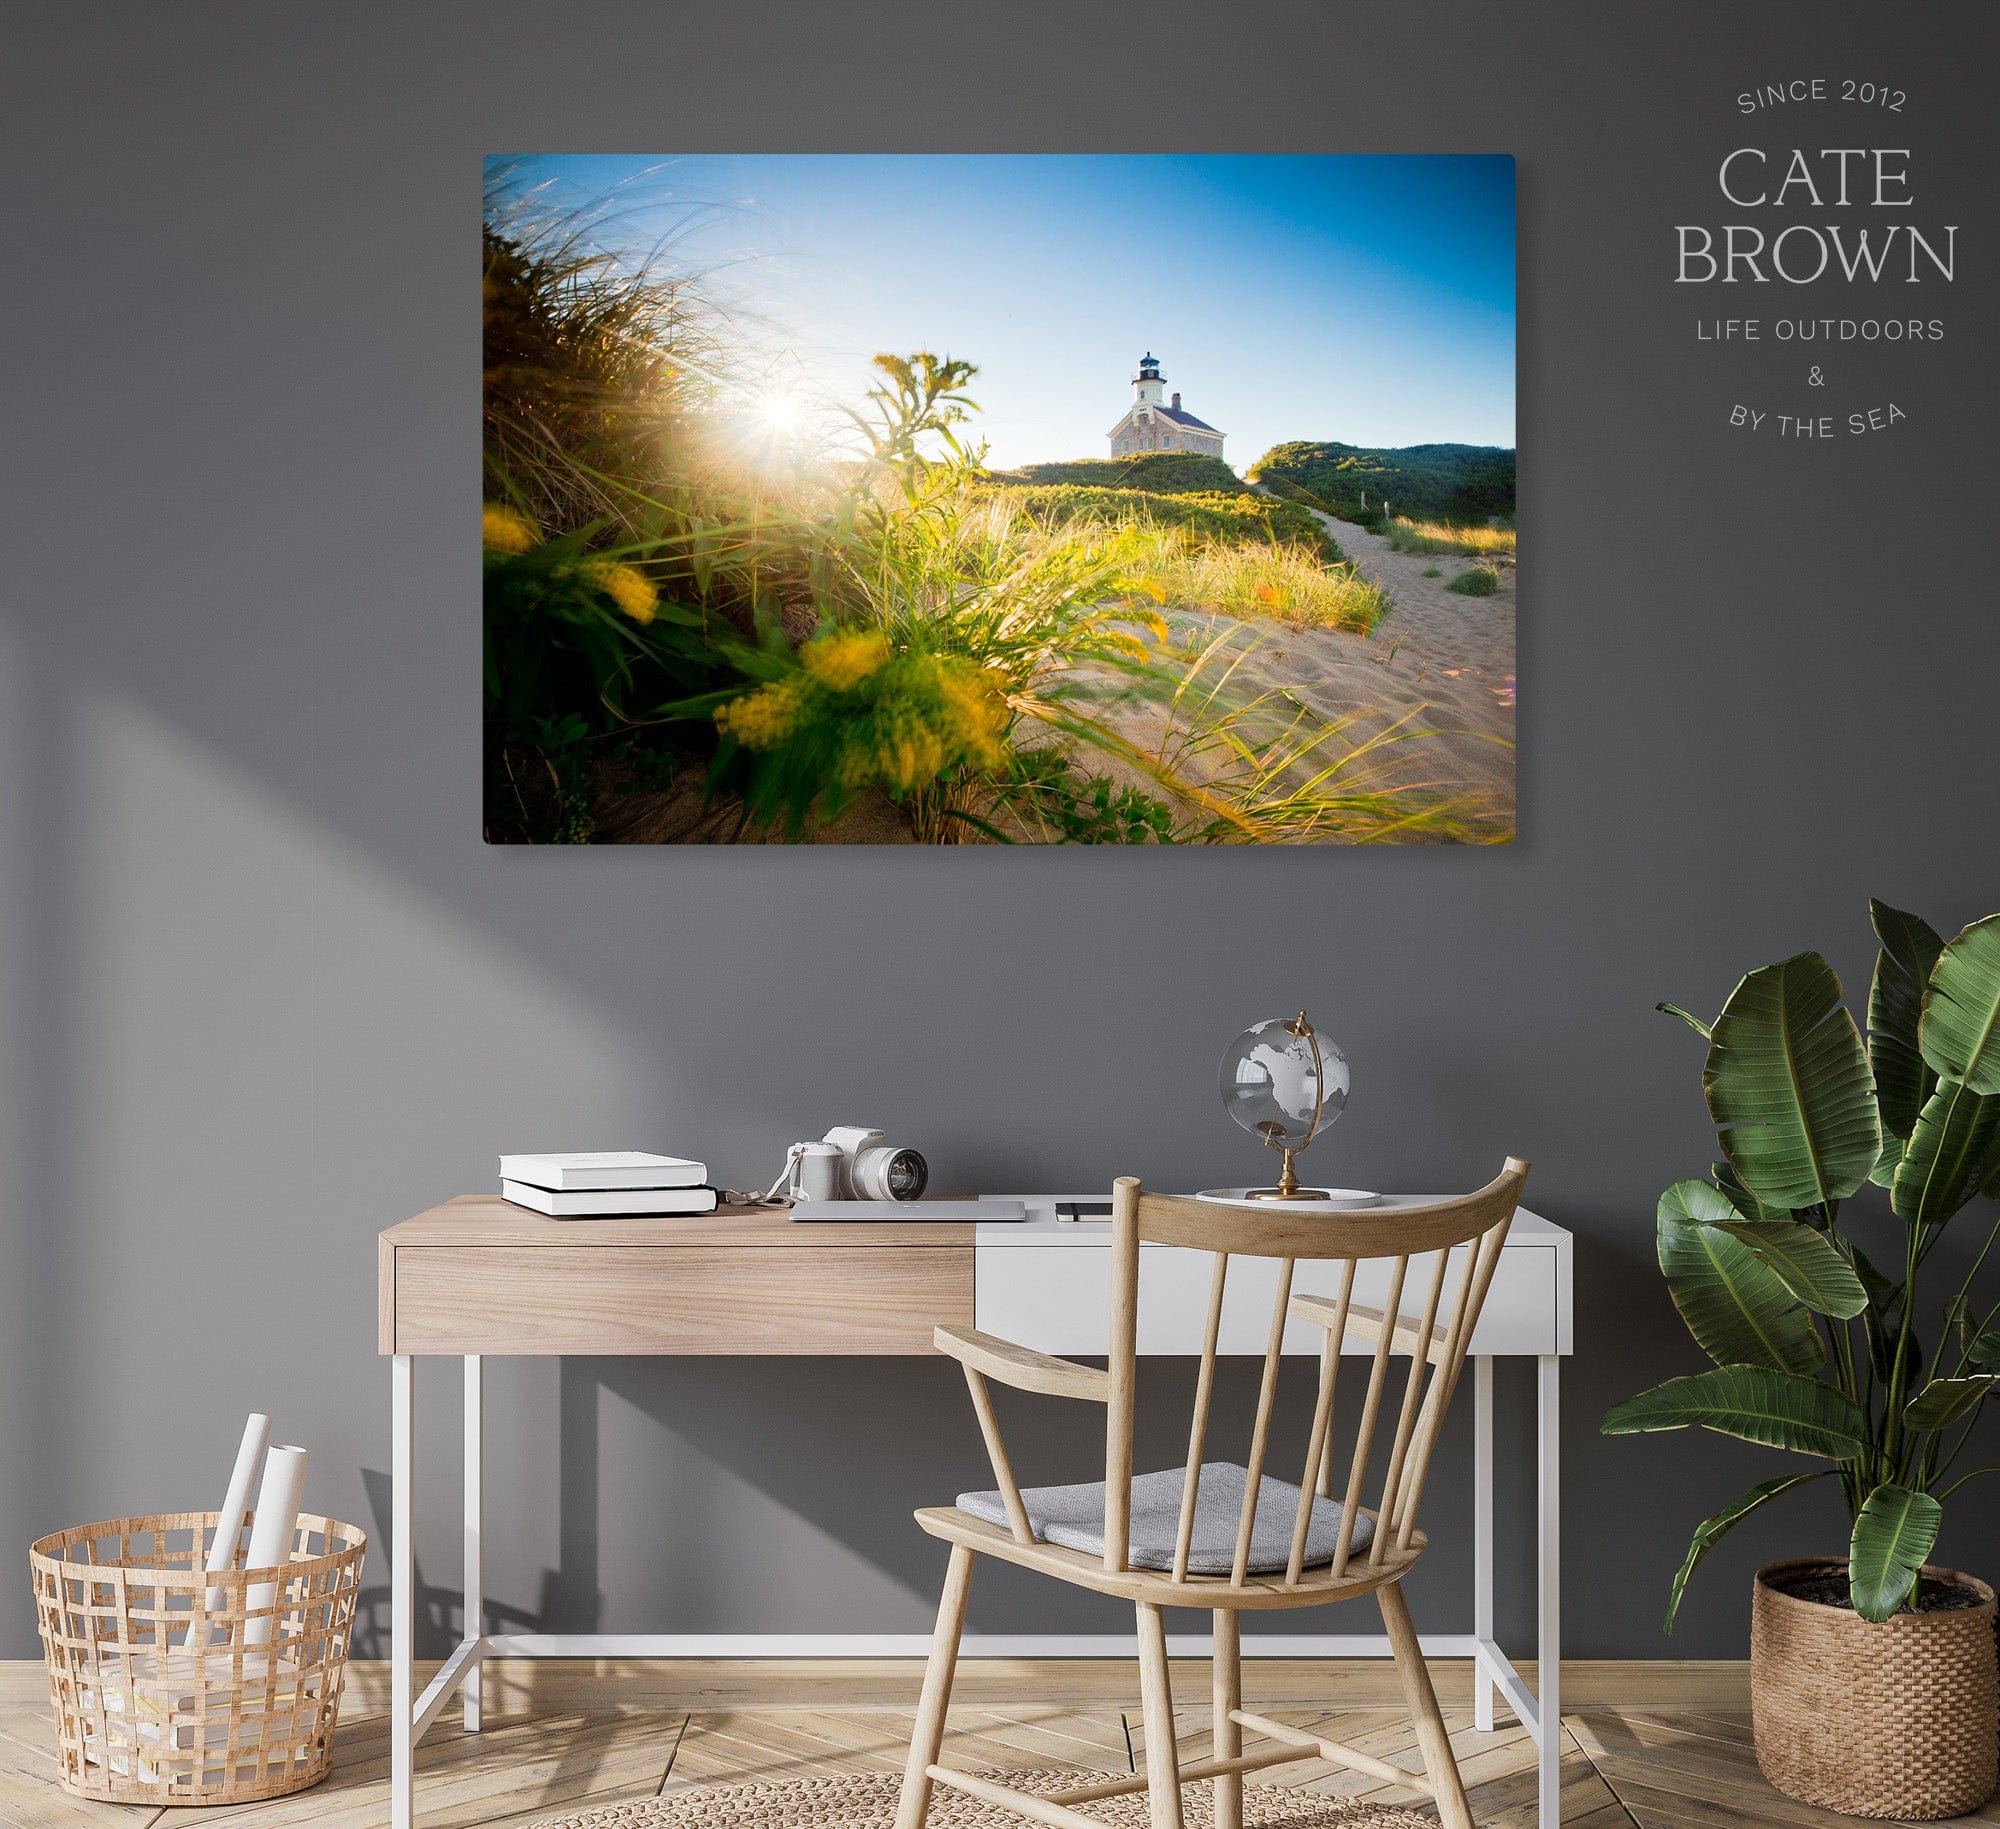 Cate Brown Photo Canvas / 16"x24" / None (Print Only) North Light in Morning #2  //  Landscape Photography Made to Order Ocean Fine Art